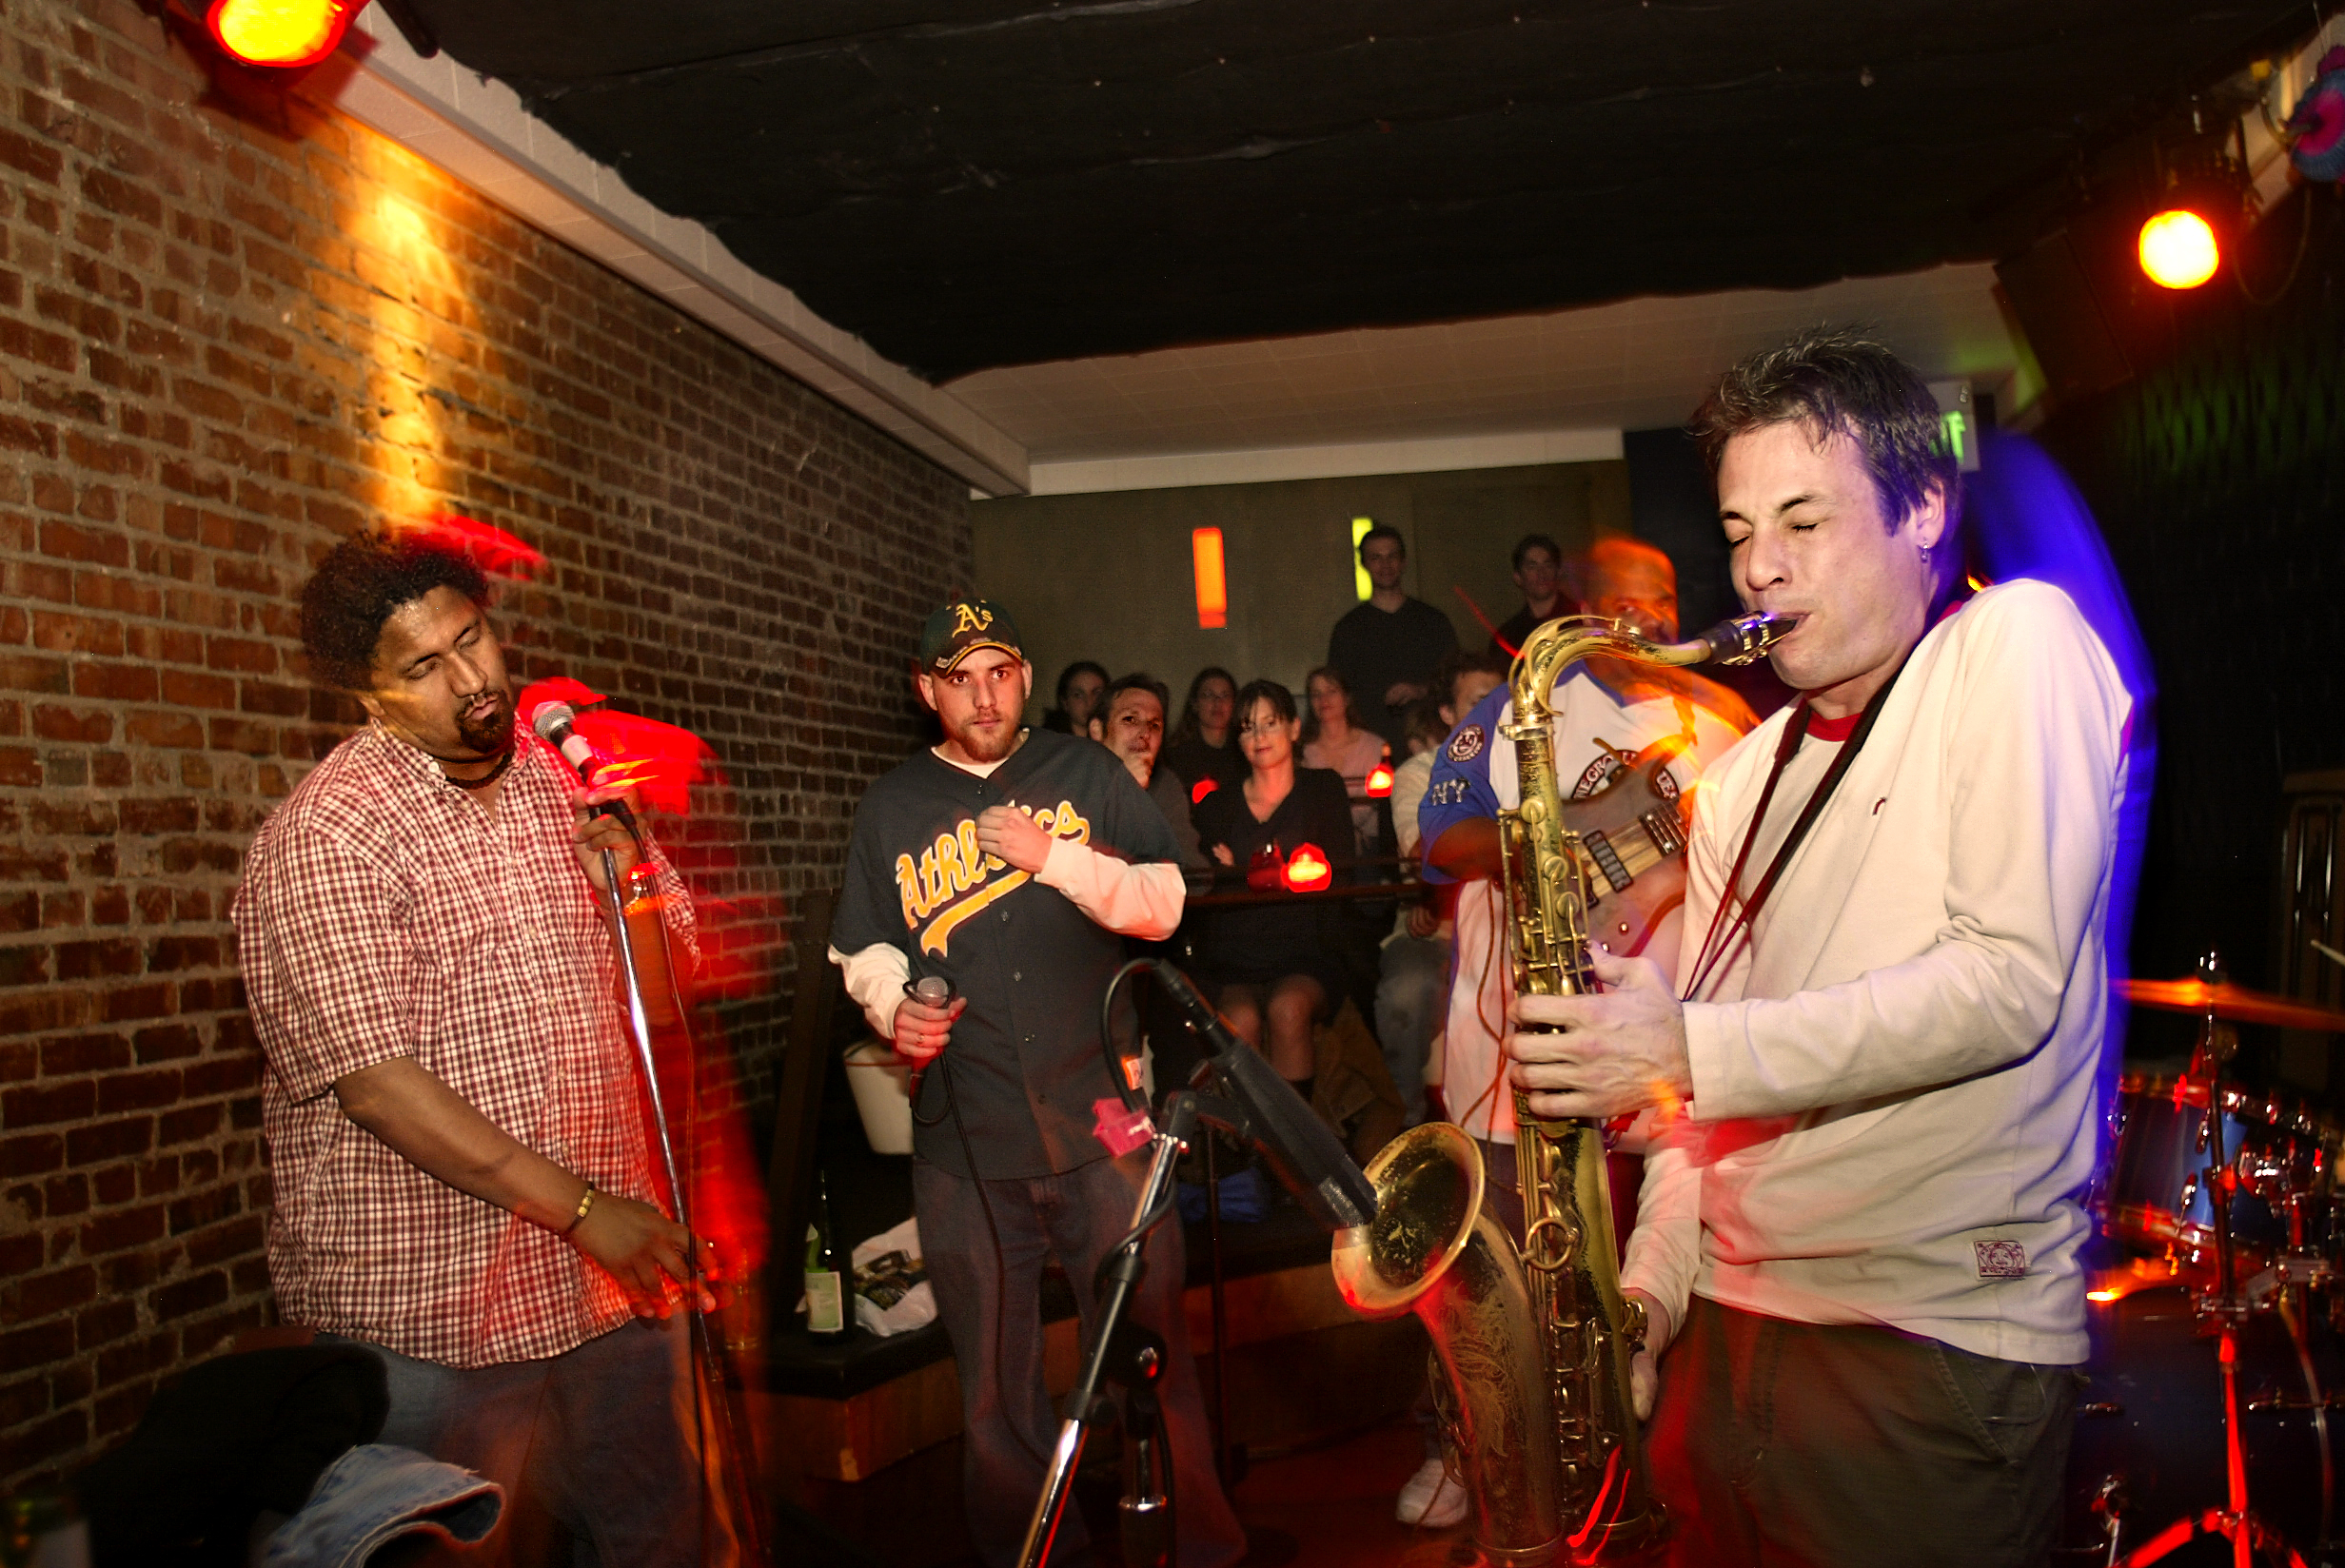 A dynamic performance photo featuring two rappers jamming out with a jazz band.